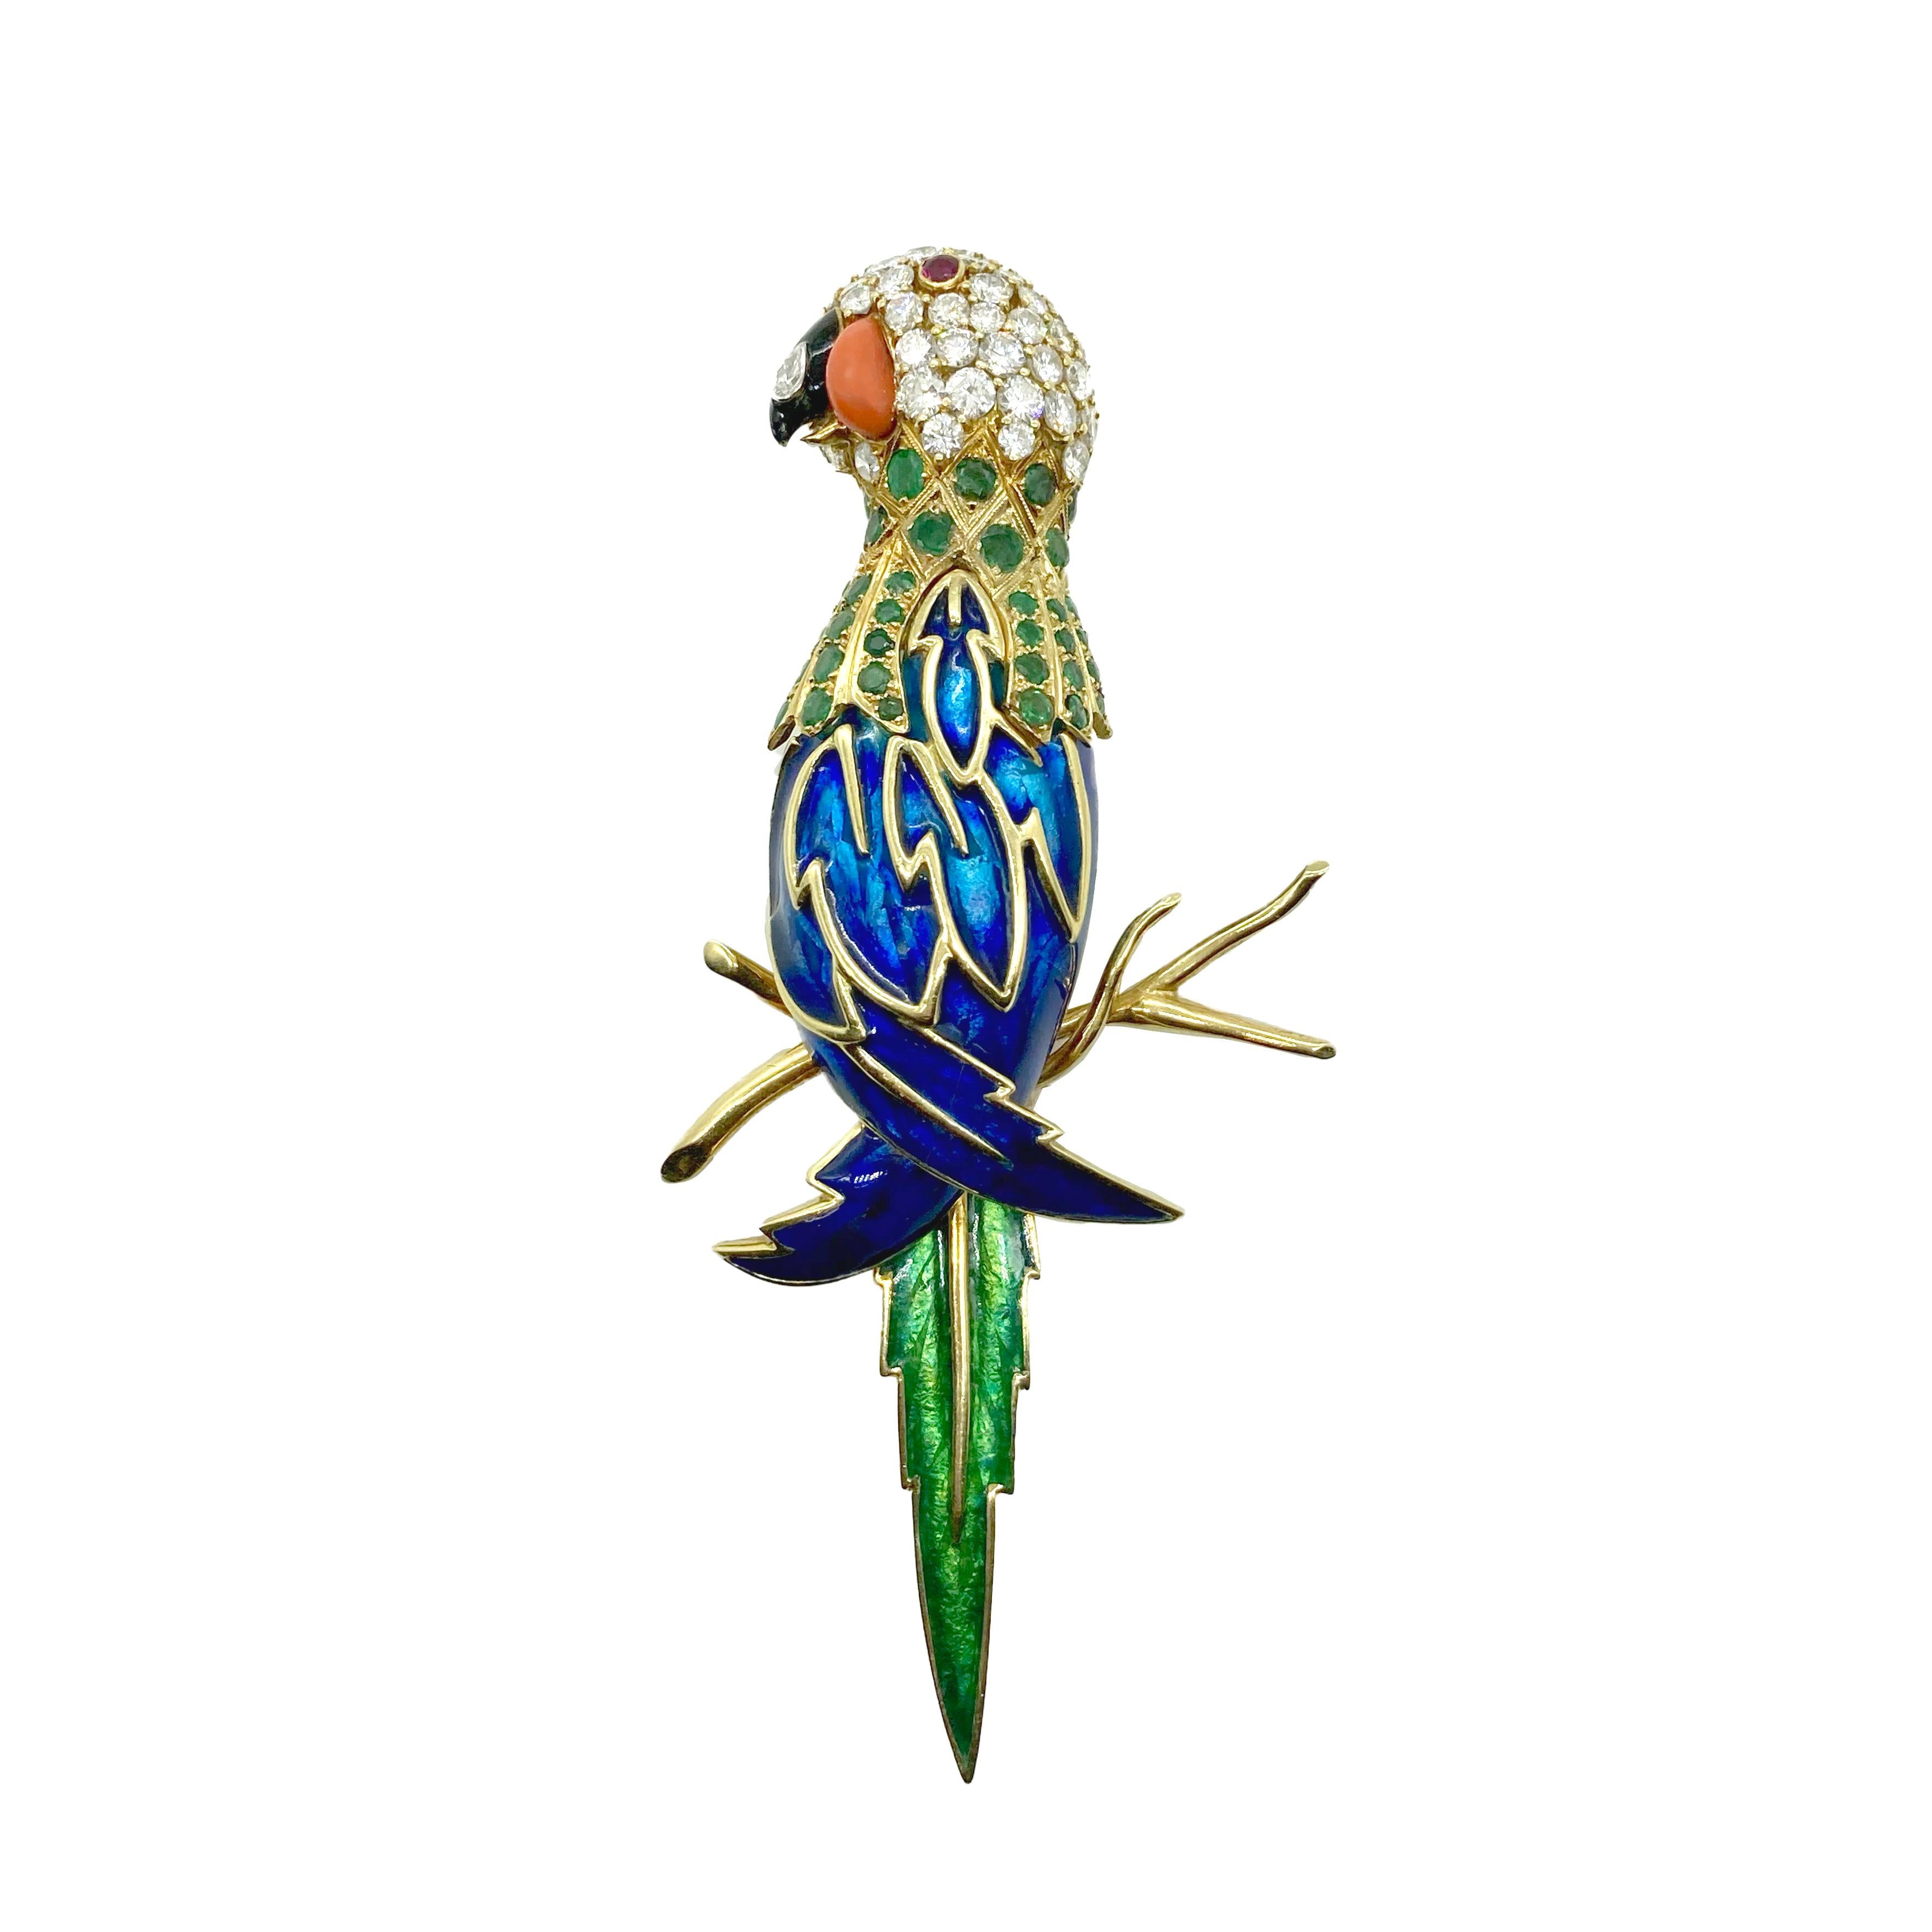 A stunning enamel statement brooch featuring a parrot embellished with 8 carats of round brilliant diamonds, 3 carats of emeralds, coral, and ruby. Mounted on 18 karat yellow gold.